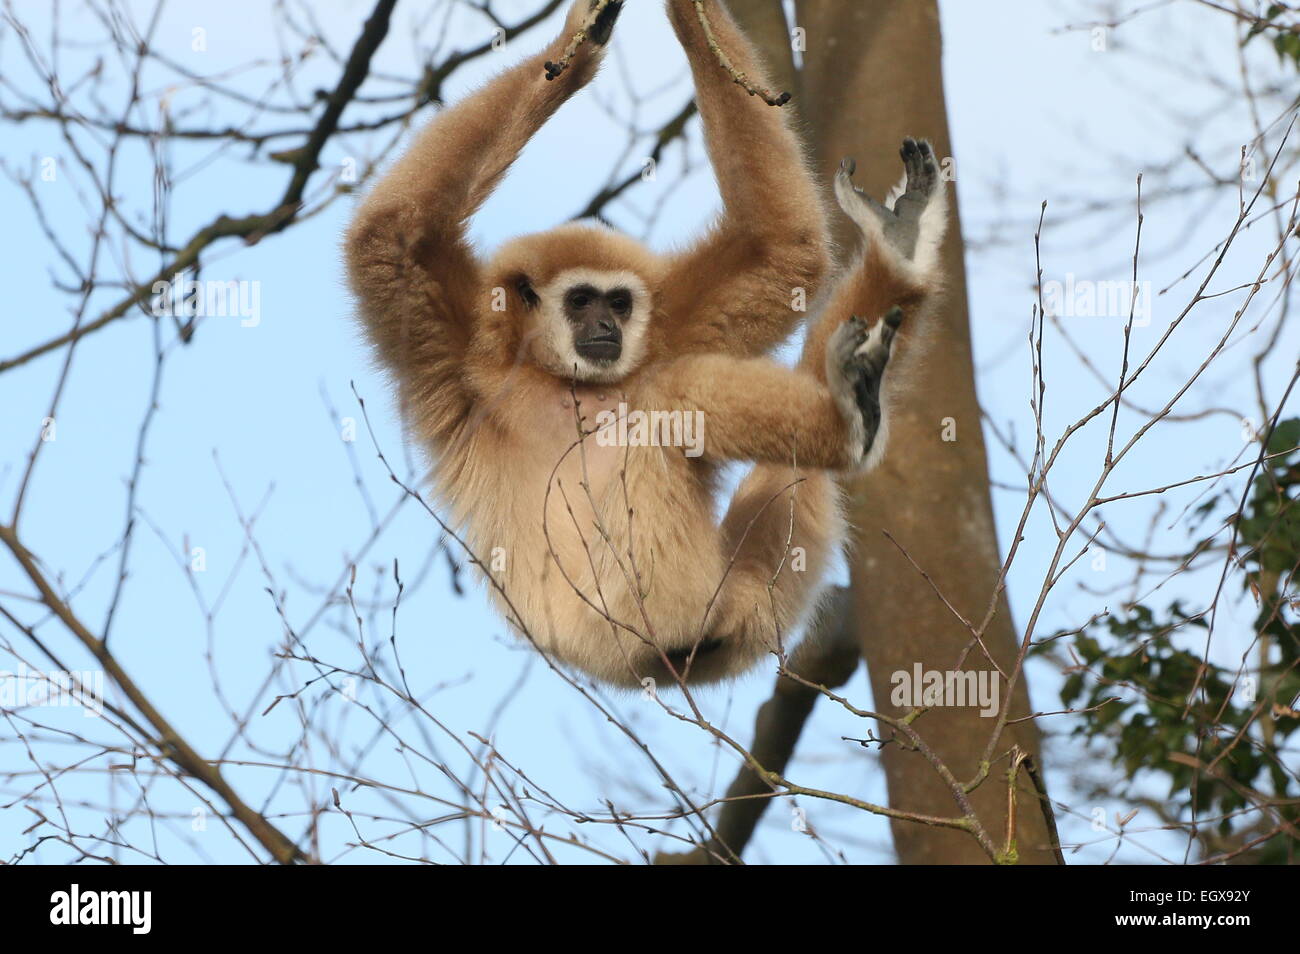 Asian Lar Gibbon or  White-Handed gibbon (Hylobates lar) swinging from branch to branch in a tree in winter Stock Photo